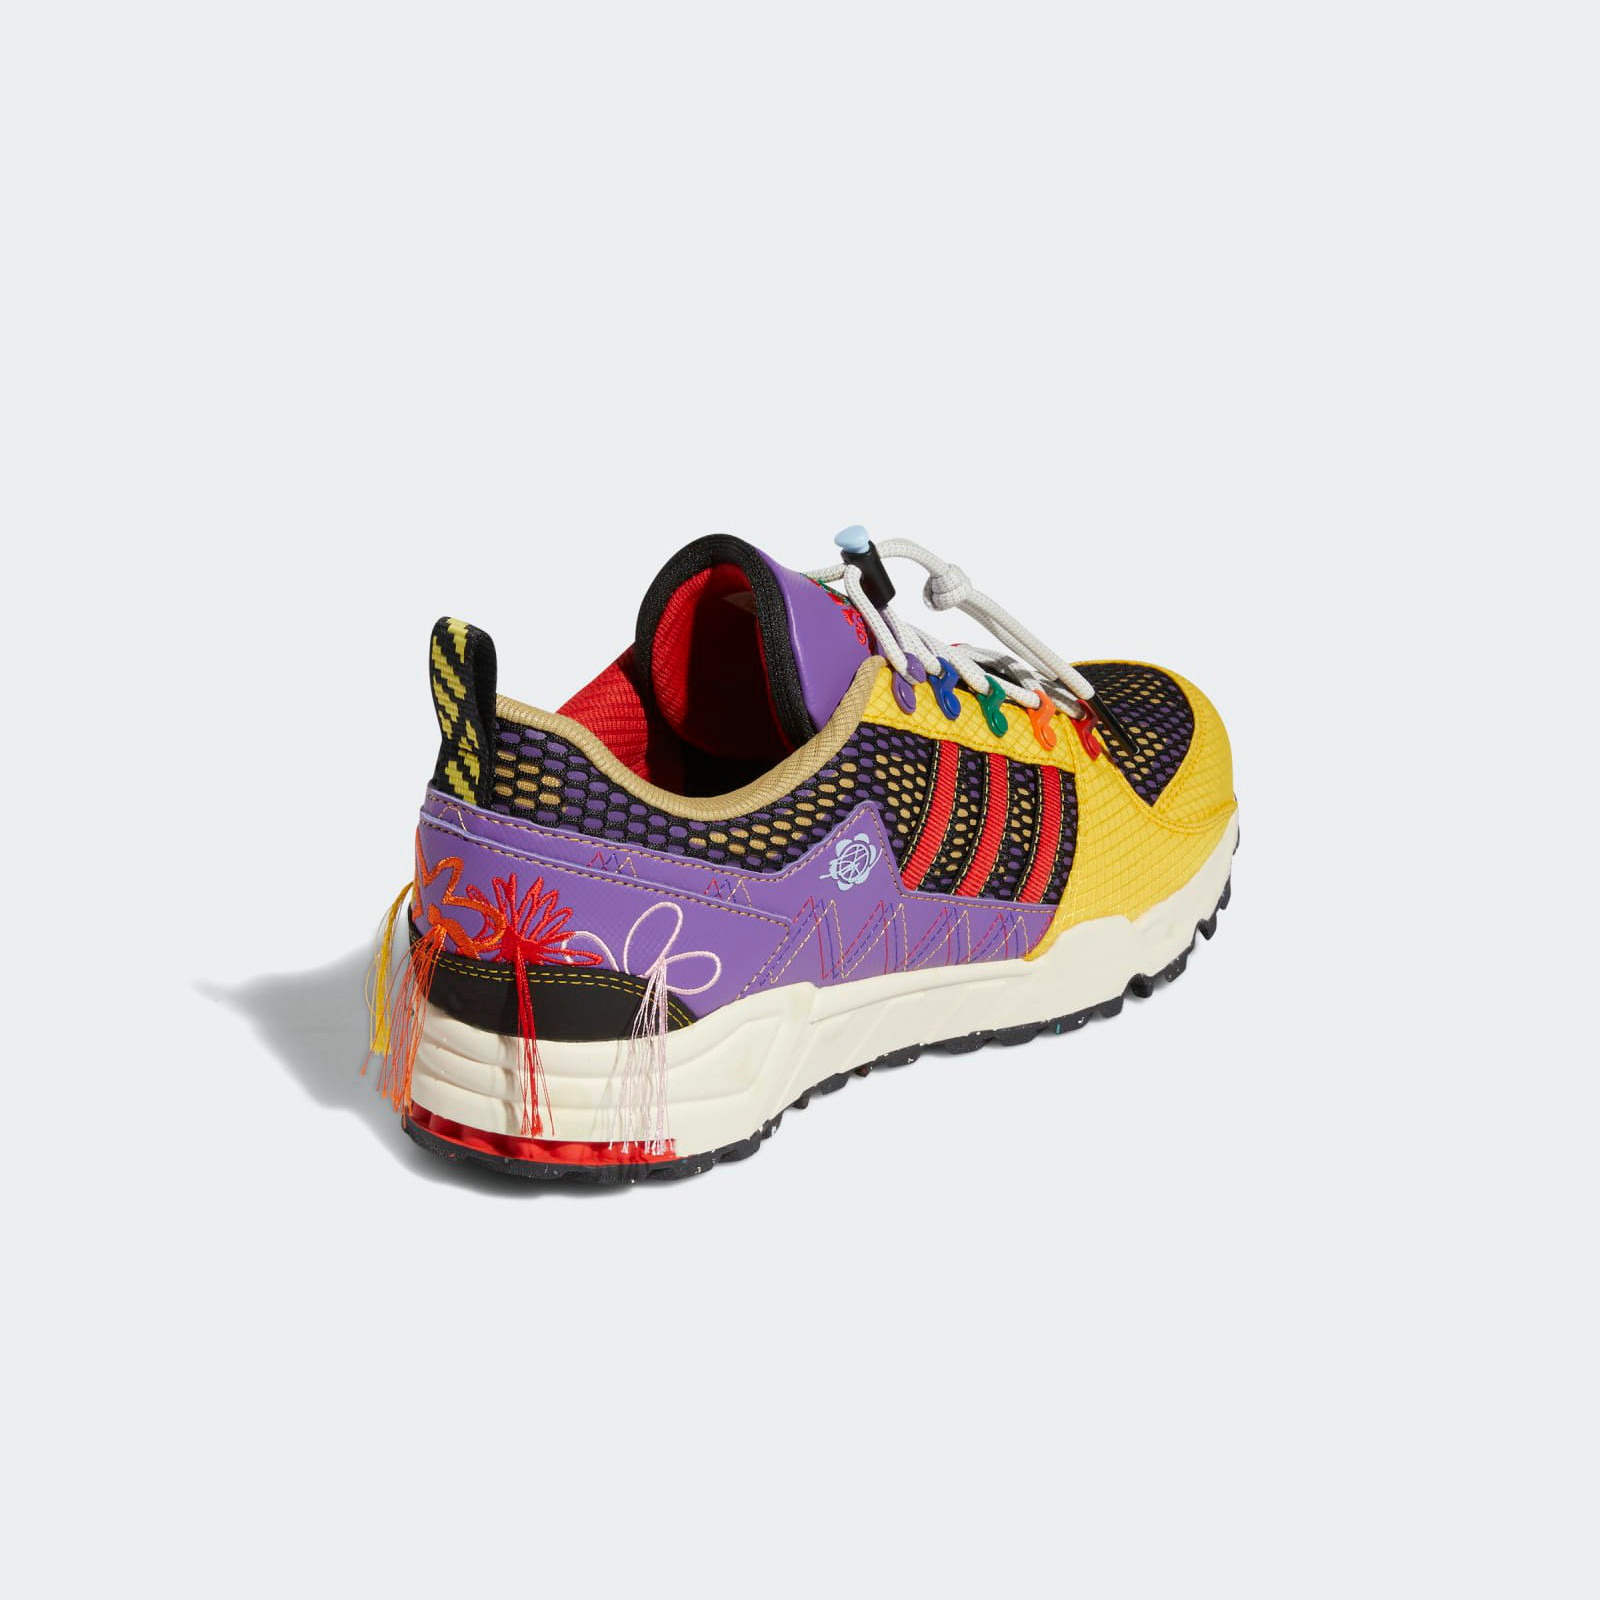 Sean Wotherspoon x Adidas
EQT Support 93
Gold / Red / Purple